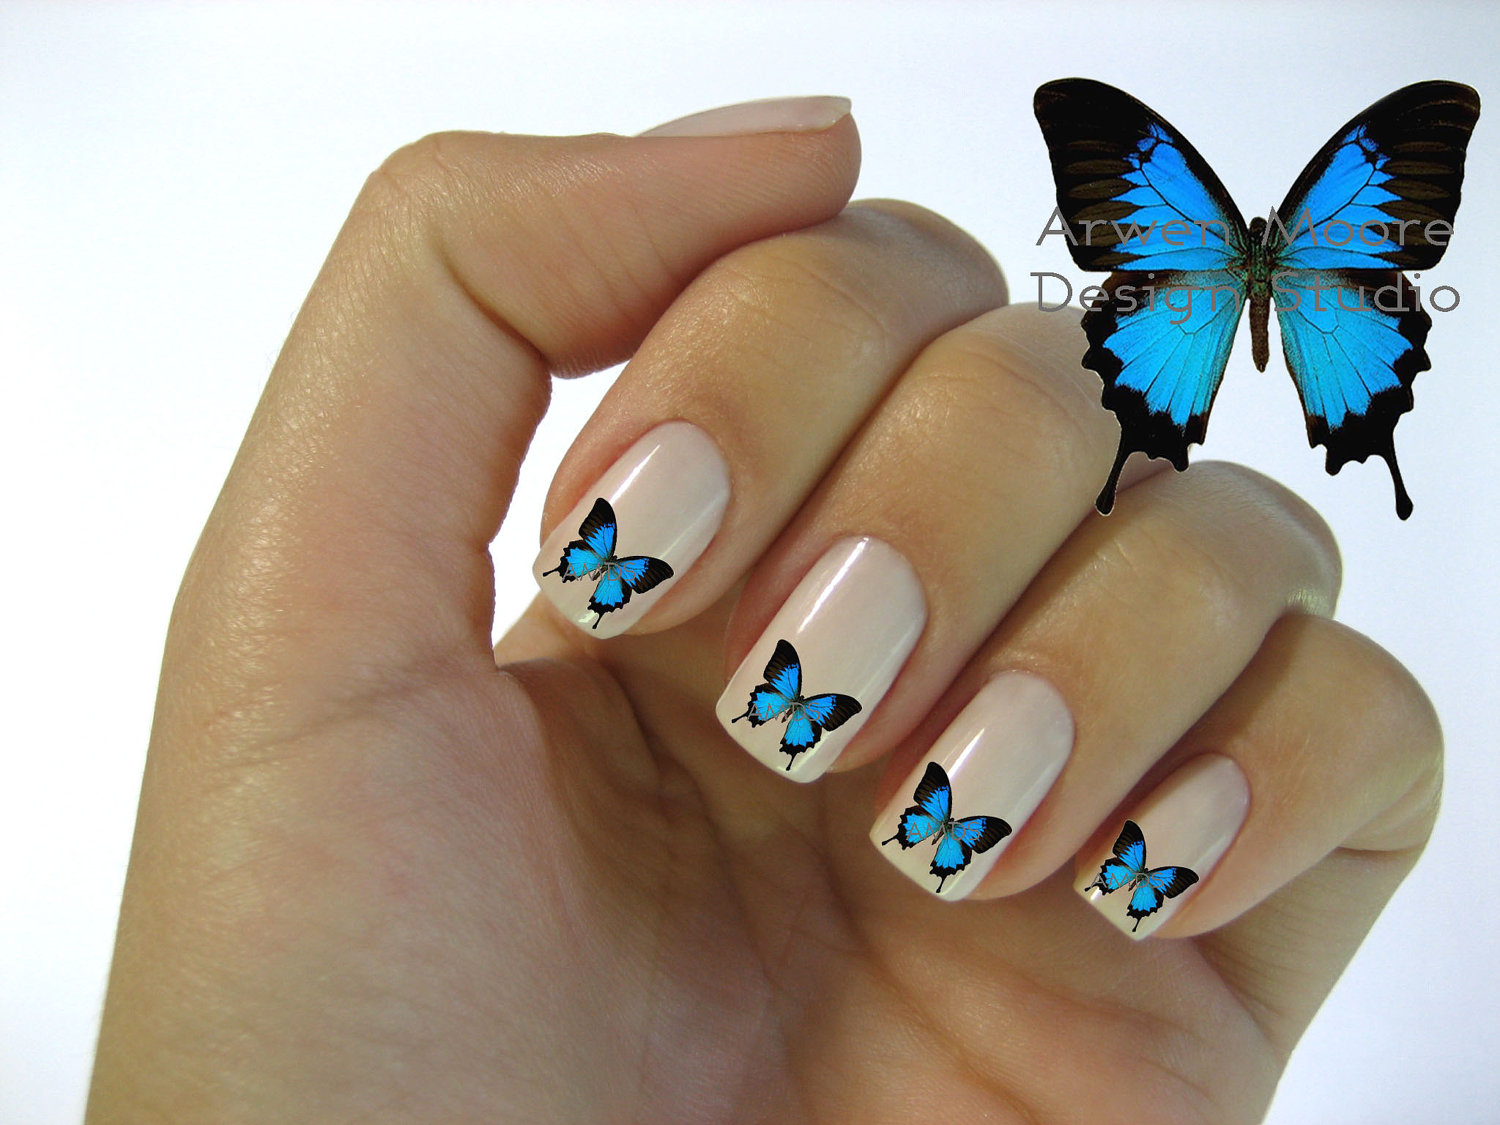 5. Butterfly Nail Designs for Springtime - wide 8